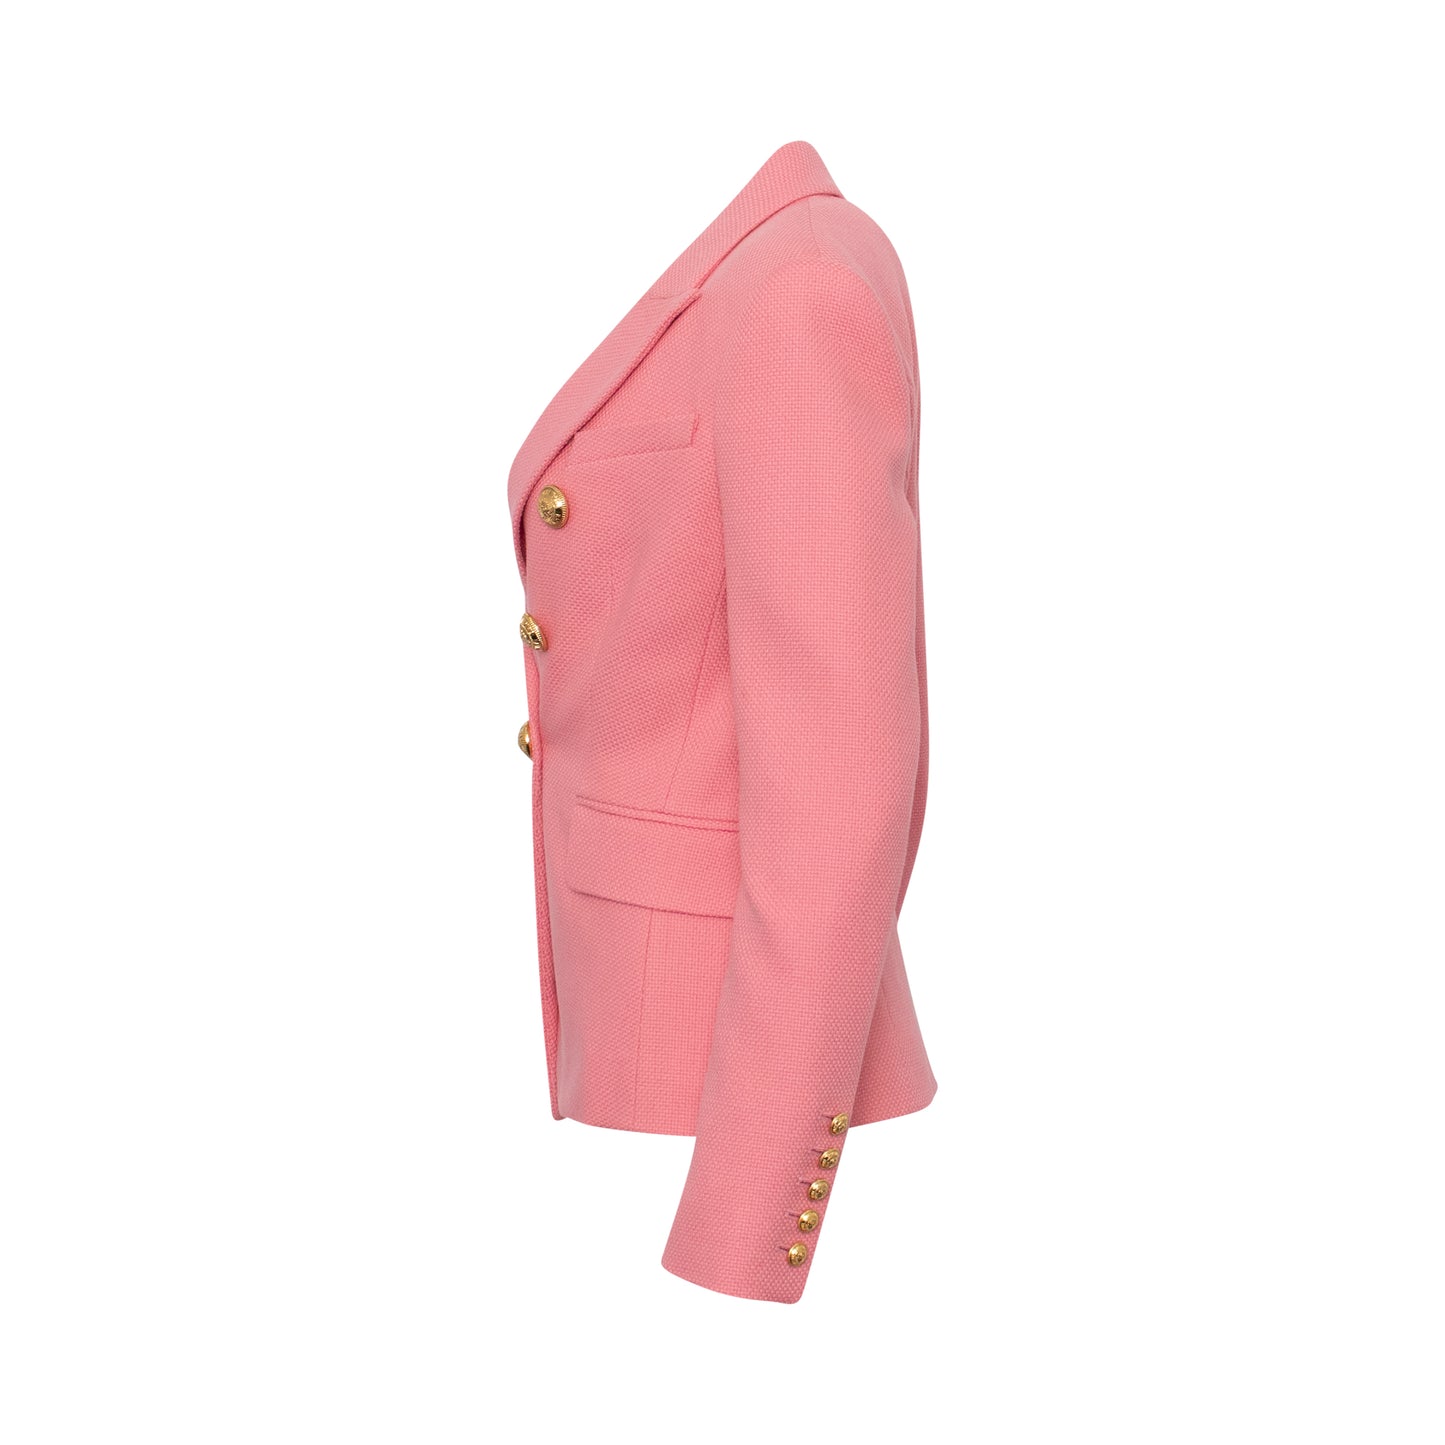 Double Breasted Cotton Pique Blazer in Rose